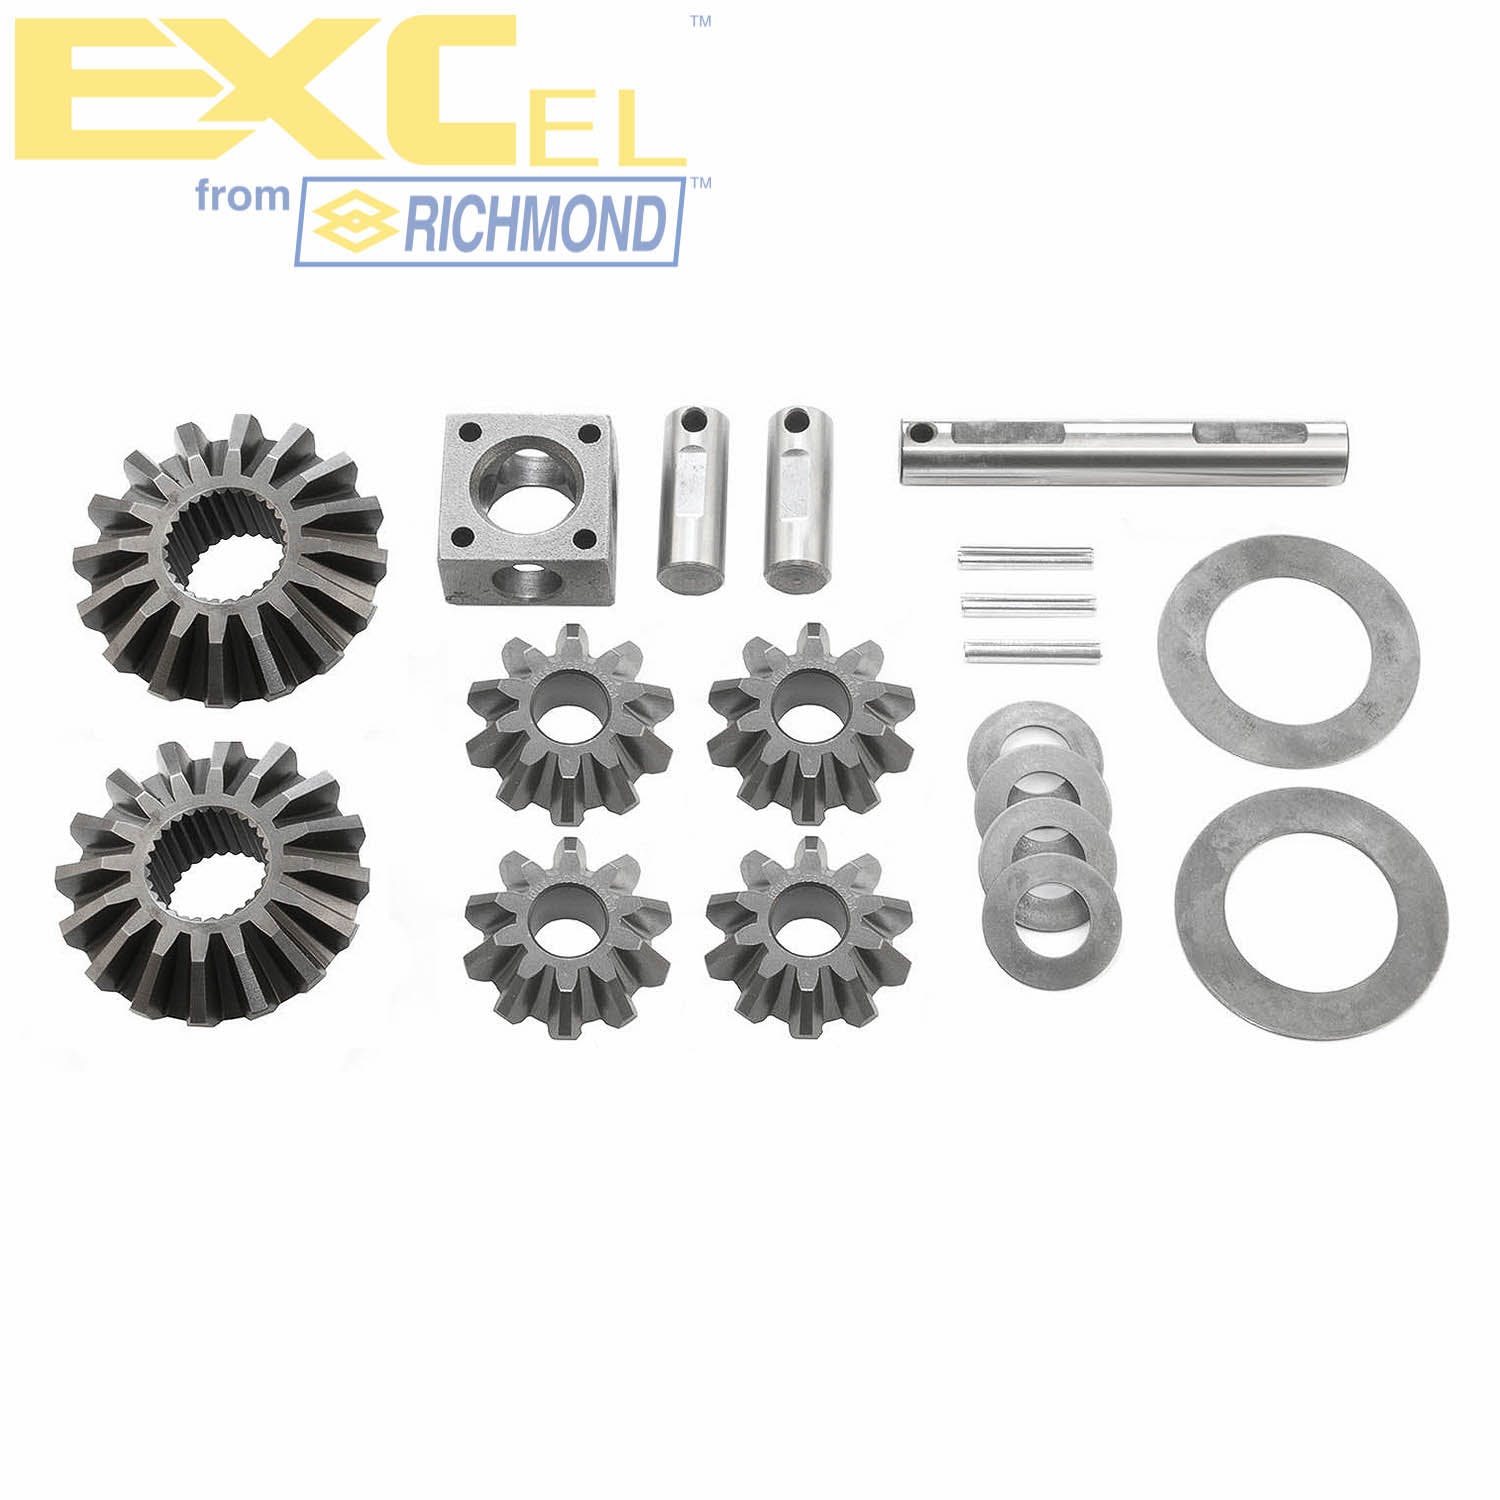 Excel XL-4024 Differential Carrier Gear Kit